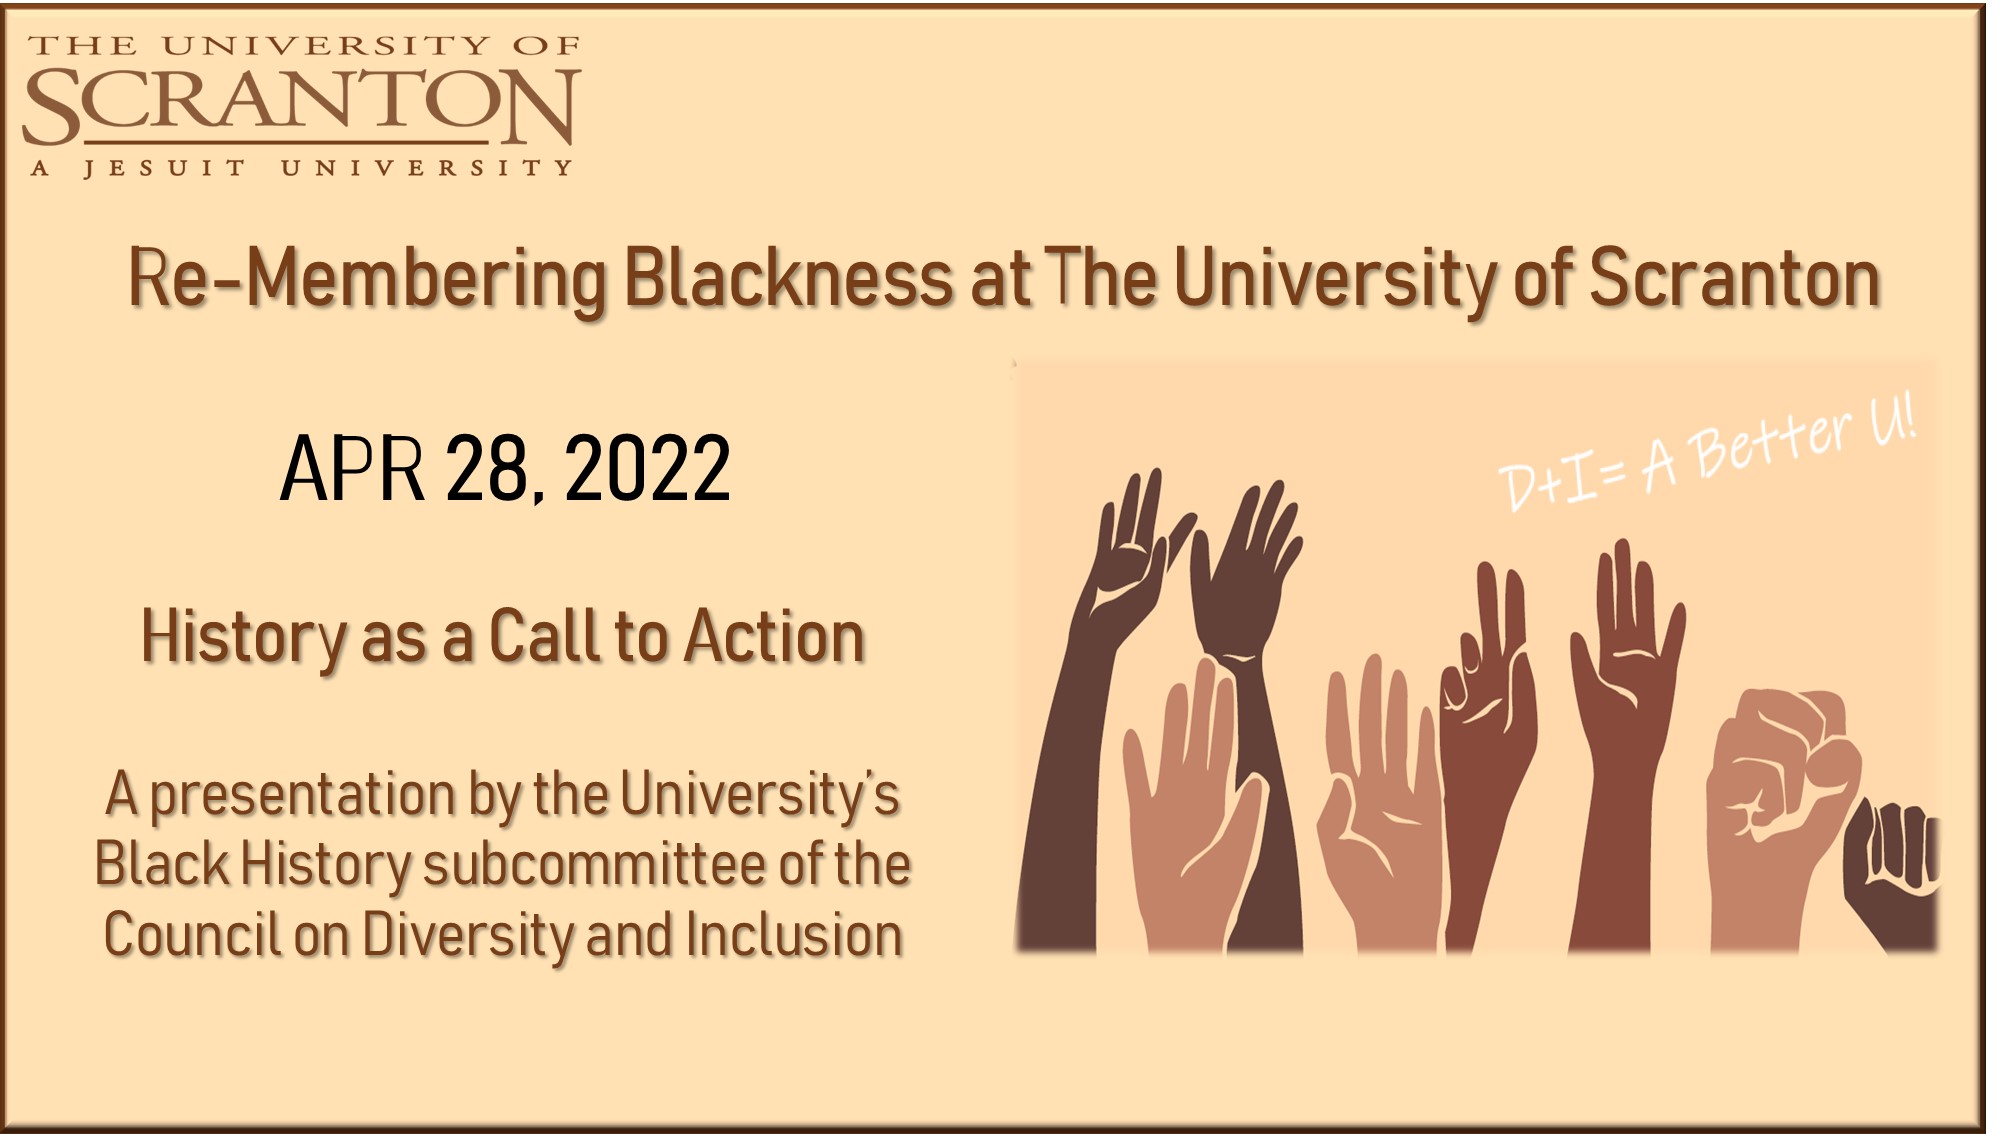 Re-Membering Blackness: History as a Call to Action